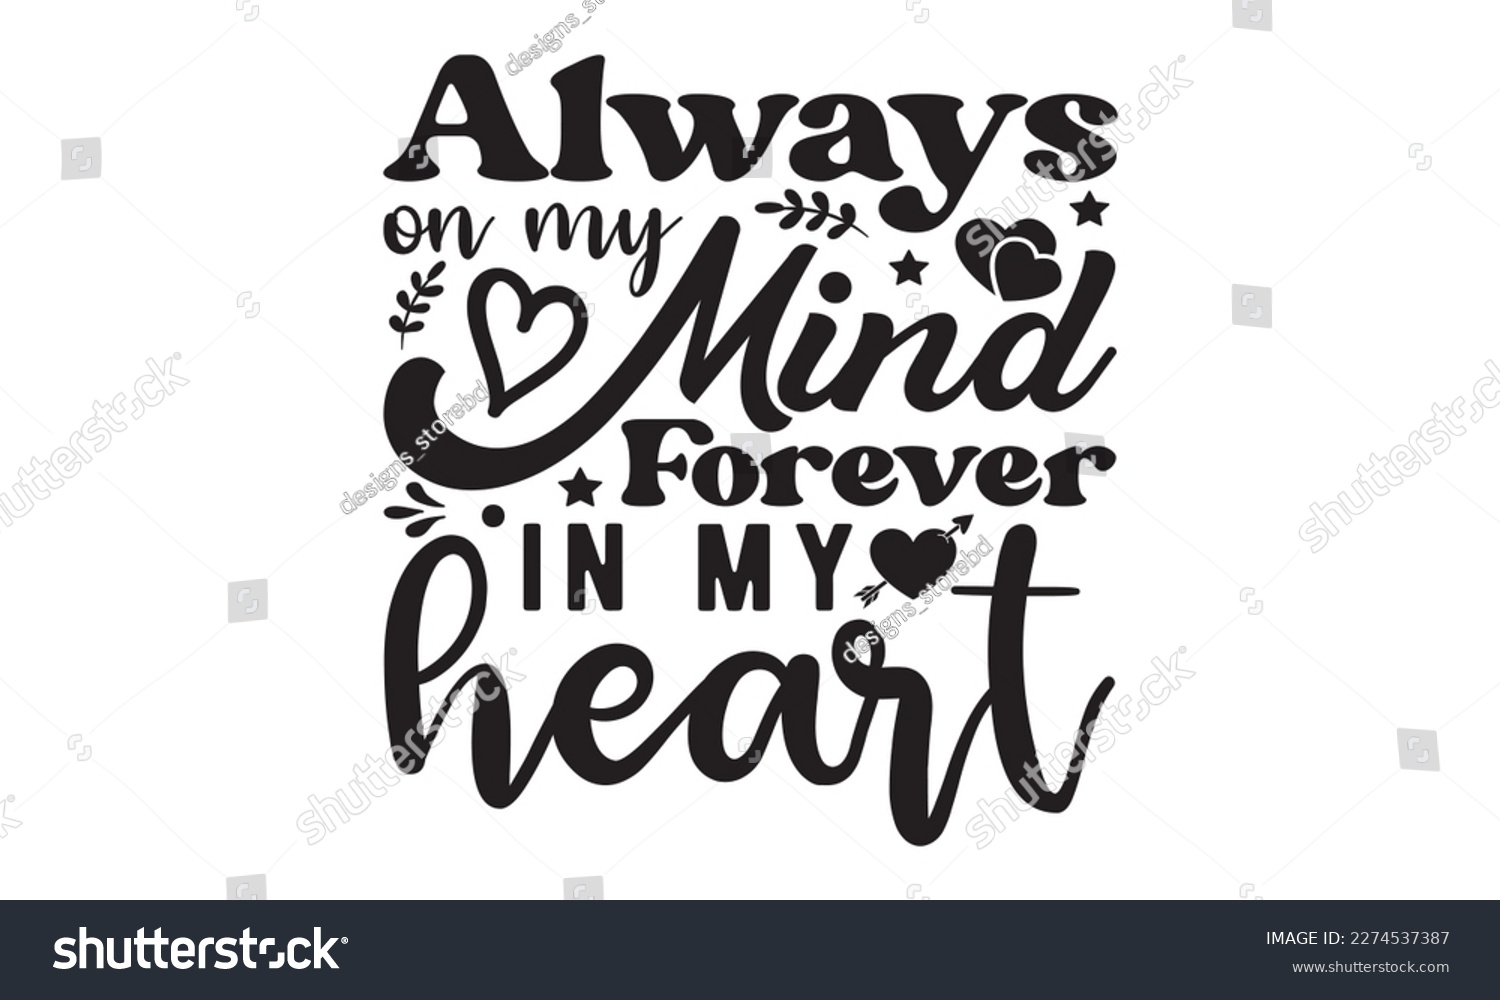 SVG of Always on my mind forever in my heart svg, Veteran t-shirt design, Memorial day svg, Hmemorial day svg design and Craft Designs background, Calligraphy graphic design typography and Hand written, EPS svg